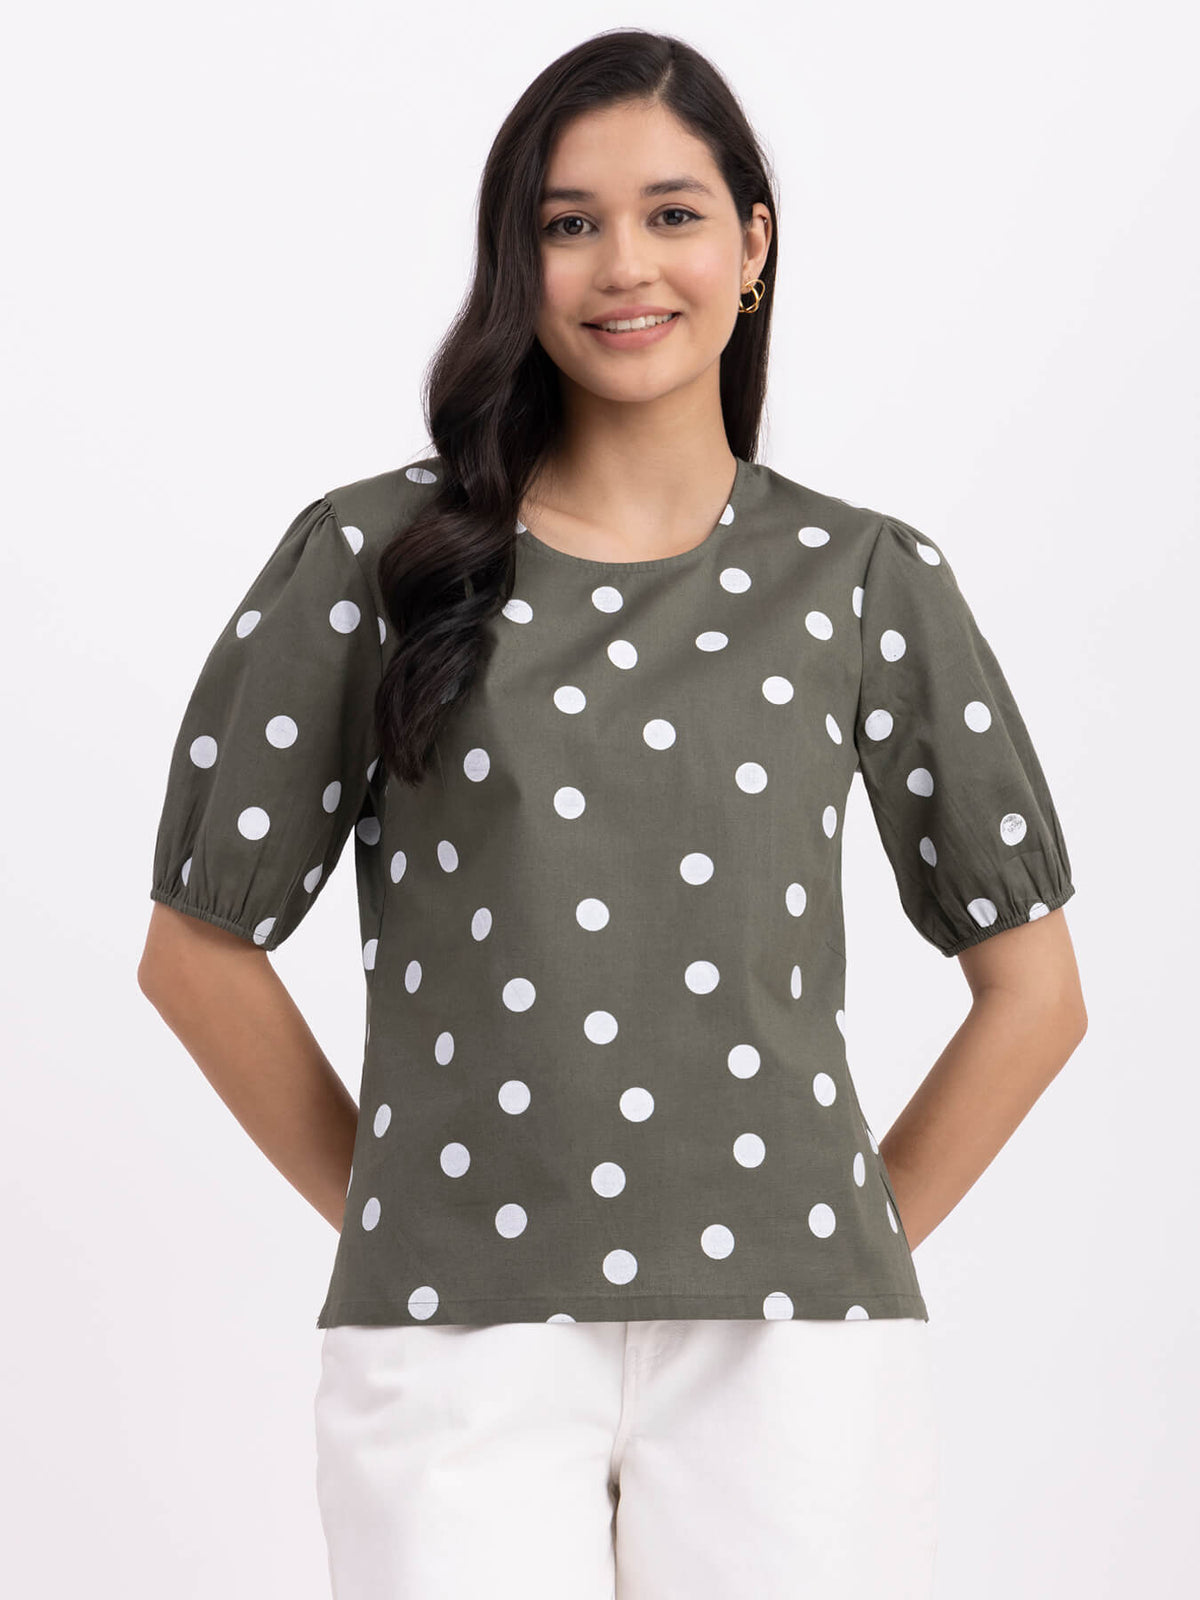 Linen Polka Dot Top - Olive And White